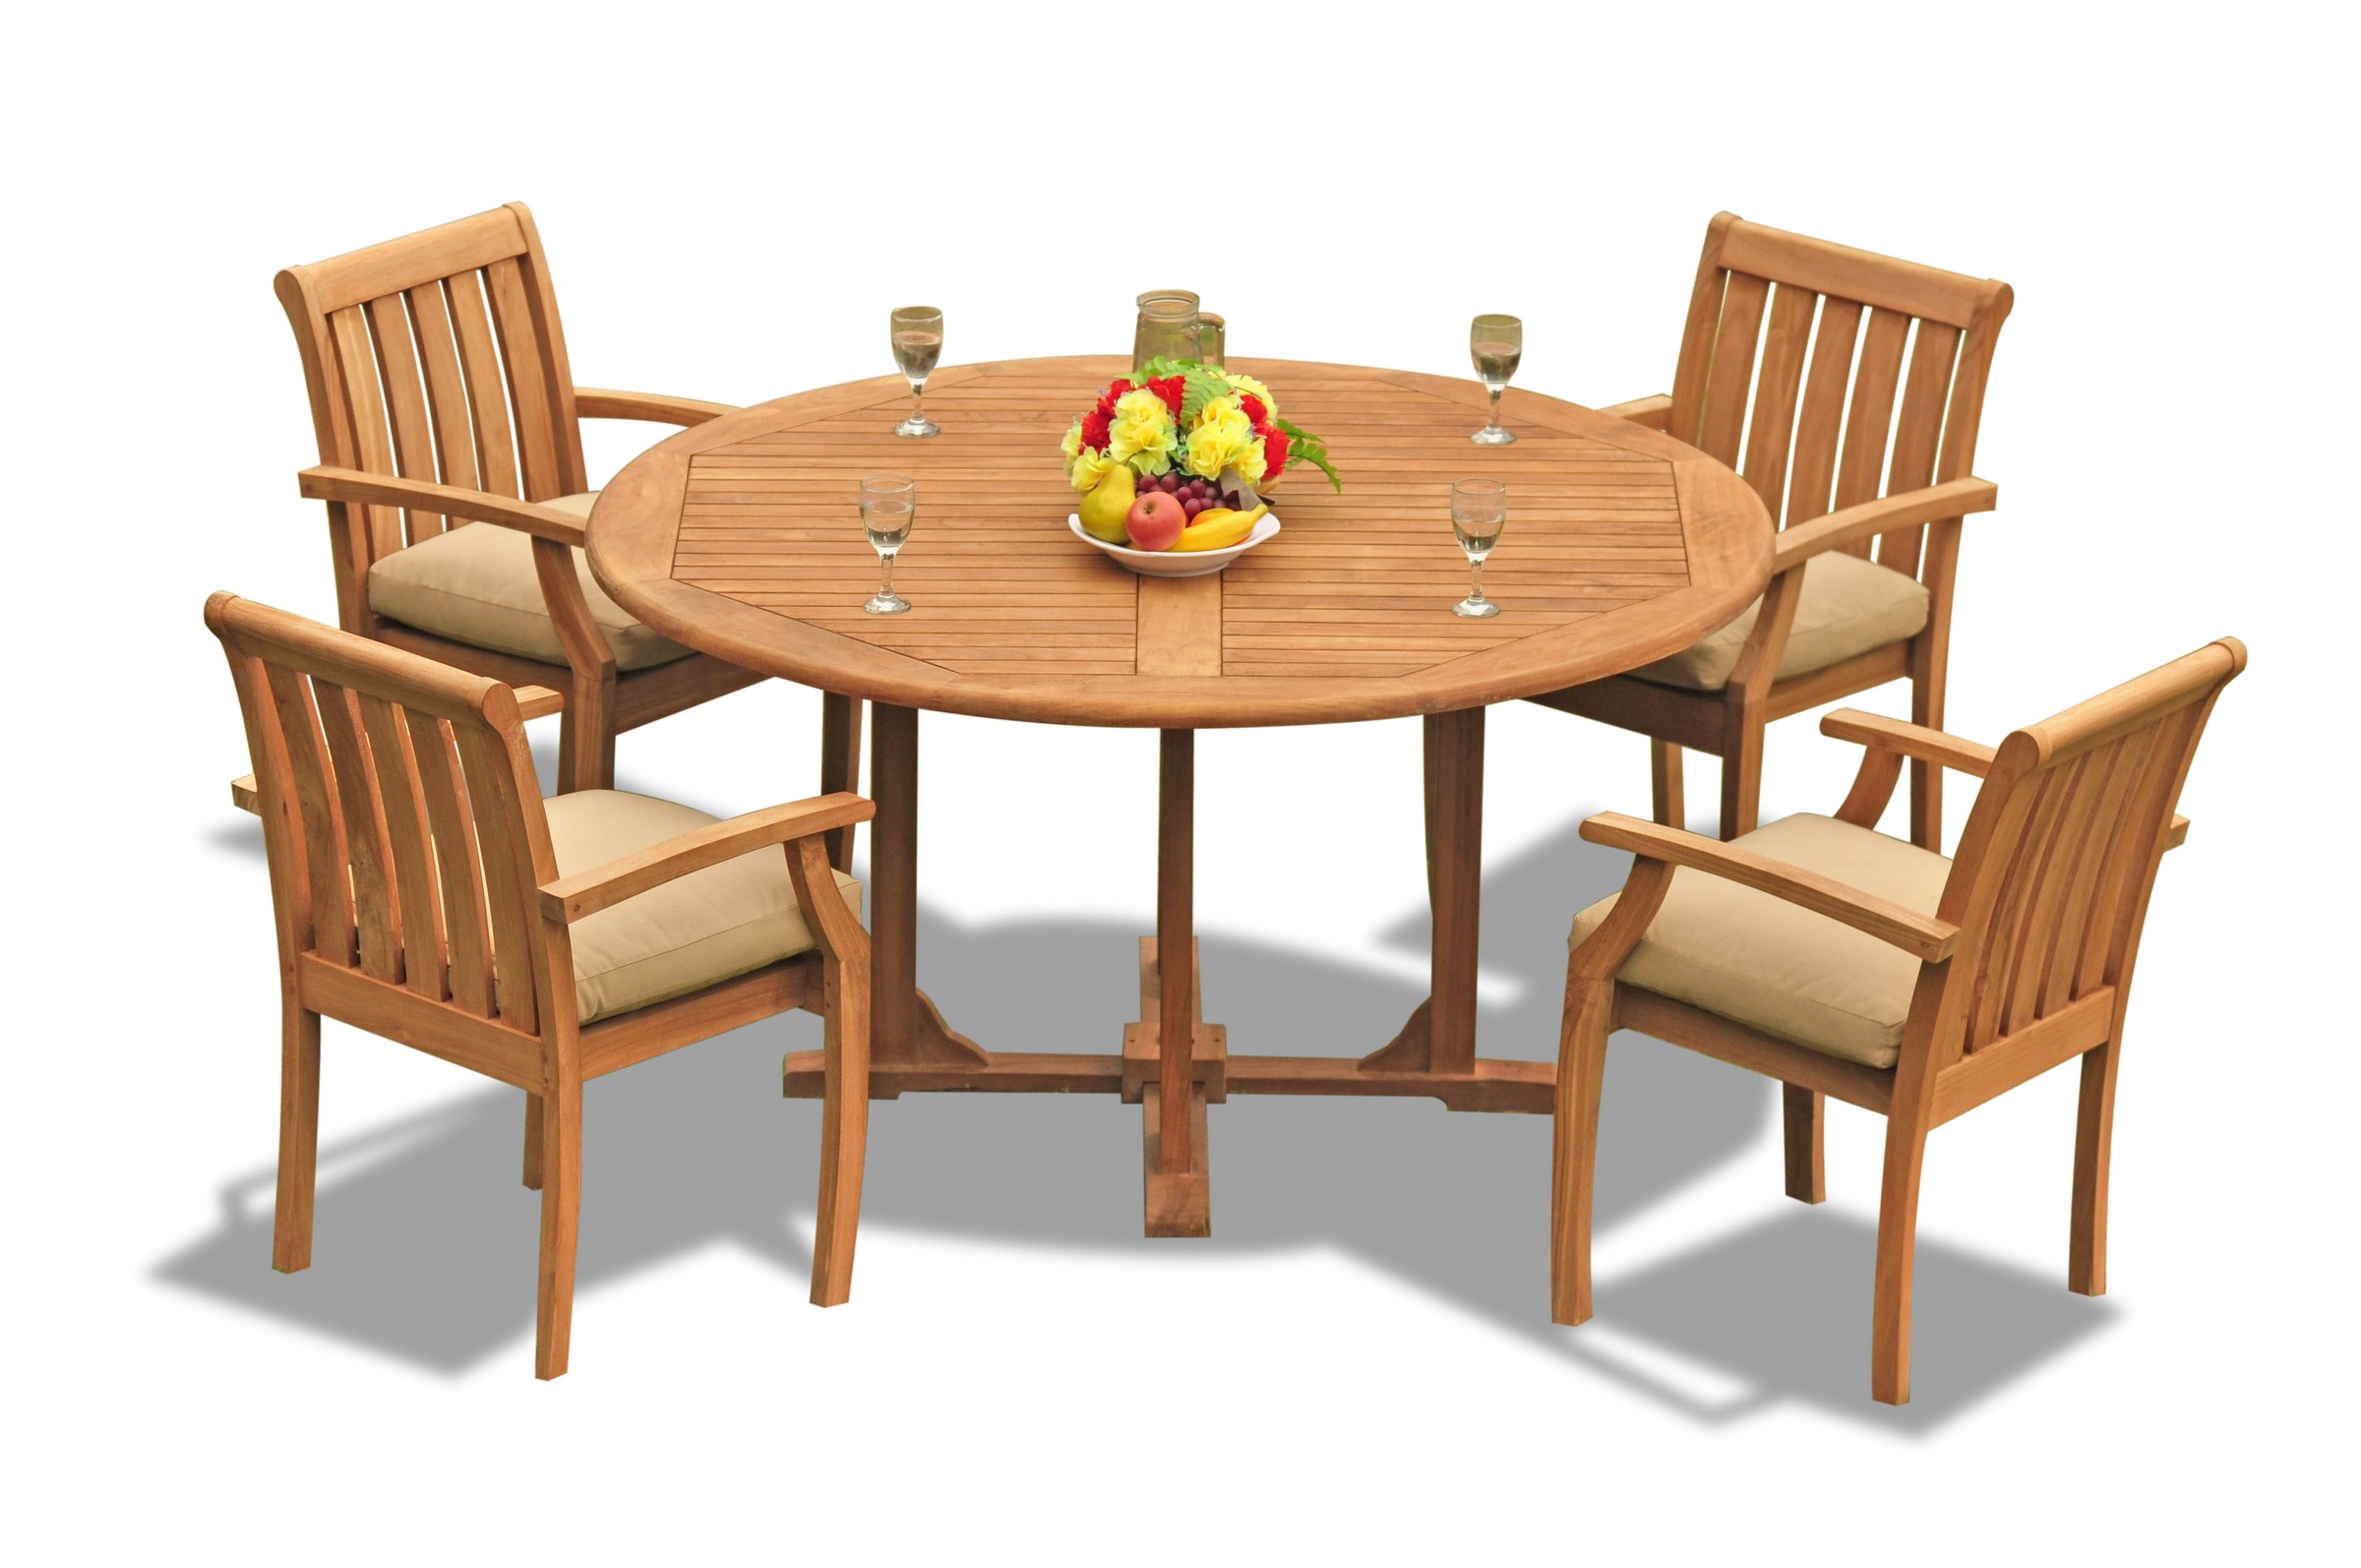 Teak Dining Set 4 Seater 5 Pc 60 Round Dining Table And 4 Somerset Stacking Armcaptain Chairs Outdoor Patio Grade A Teak Wood Wholesaleteak for dimensions 2400 X 1594